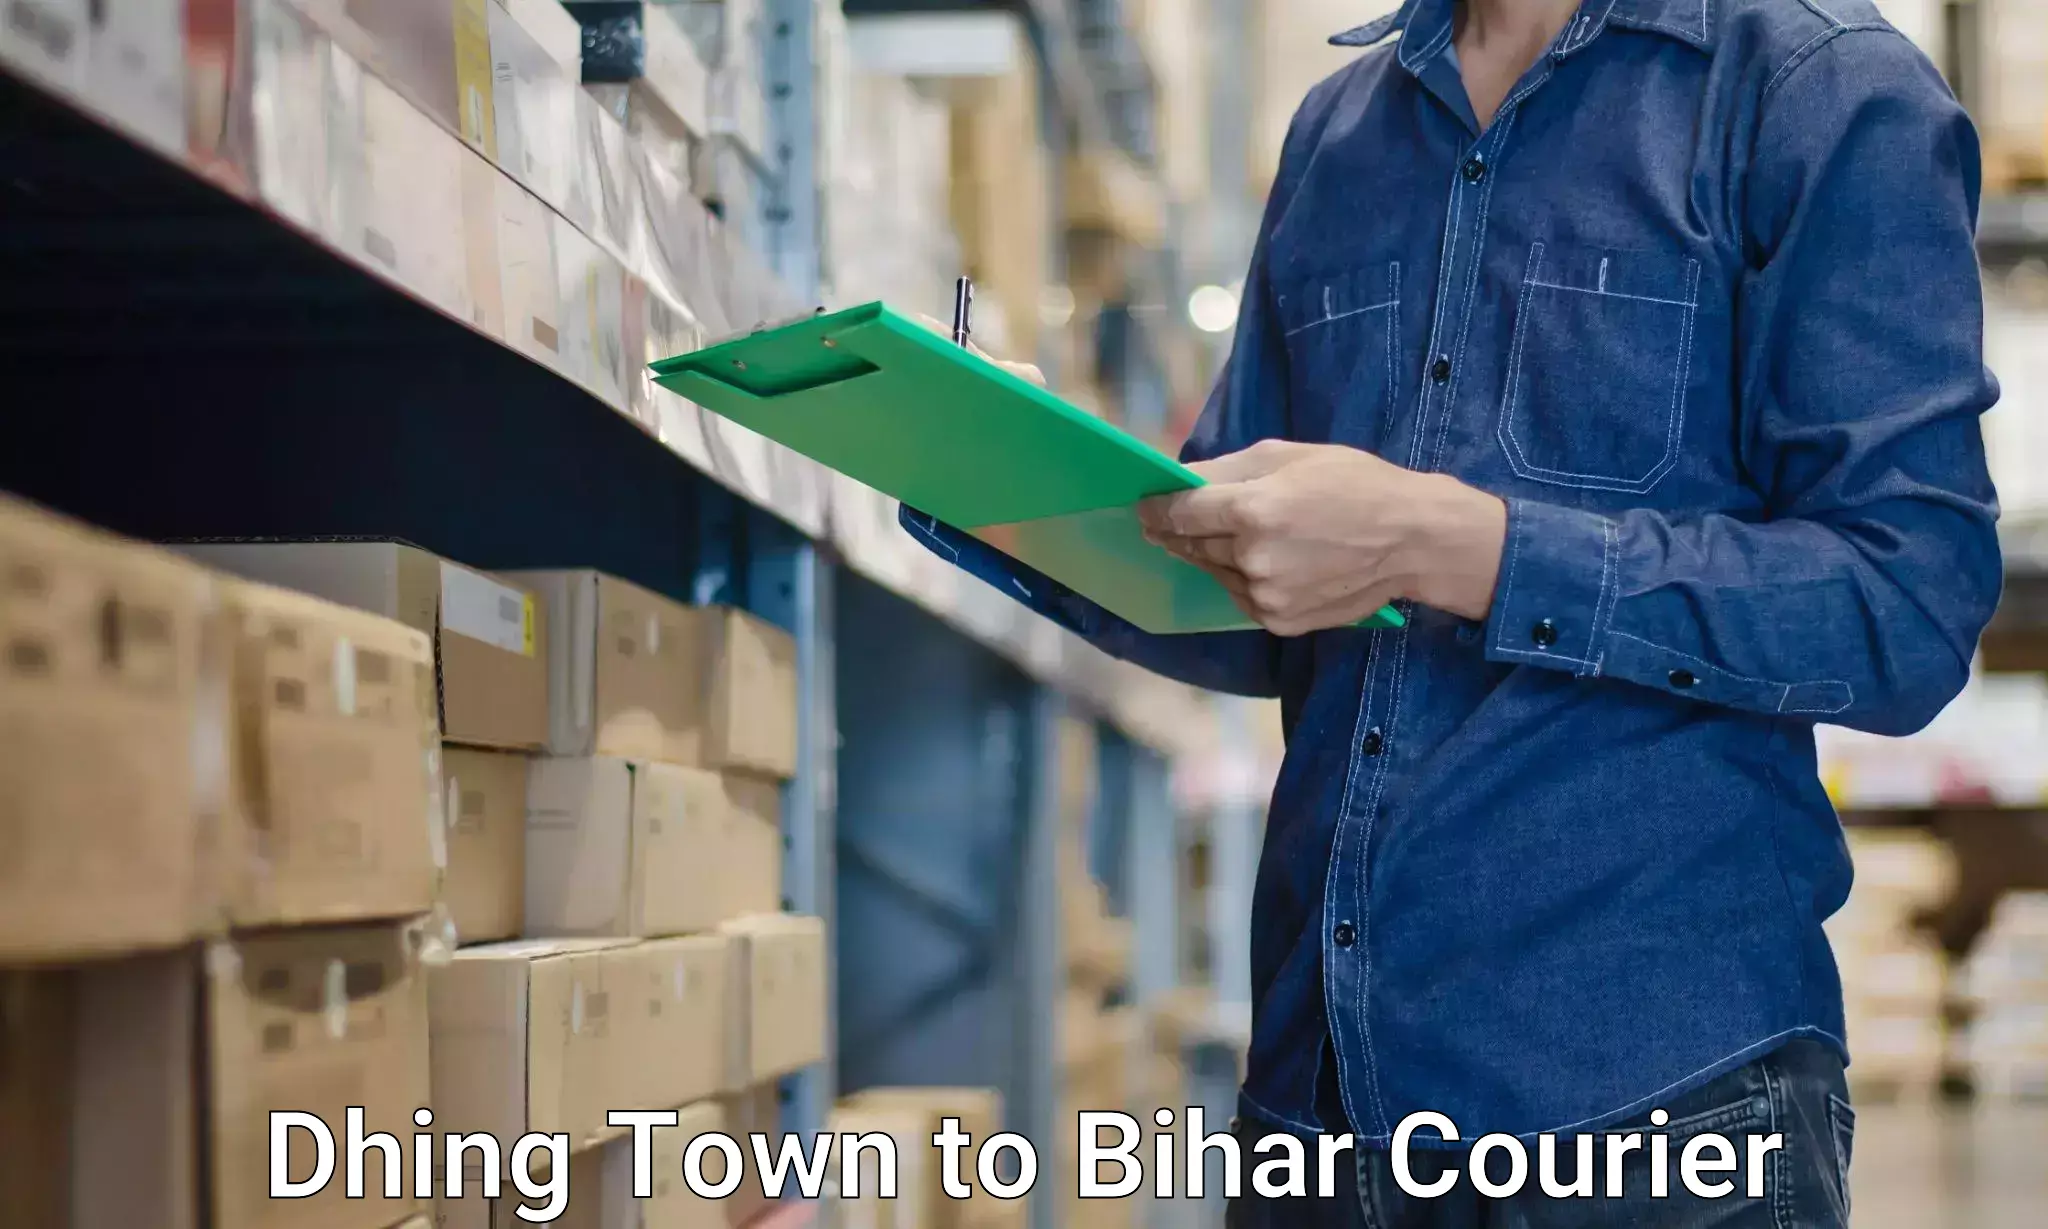 Furniture delivery service Dhing Town to Buxar